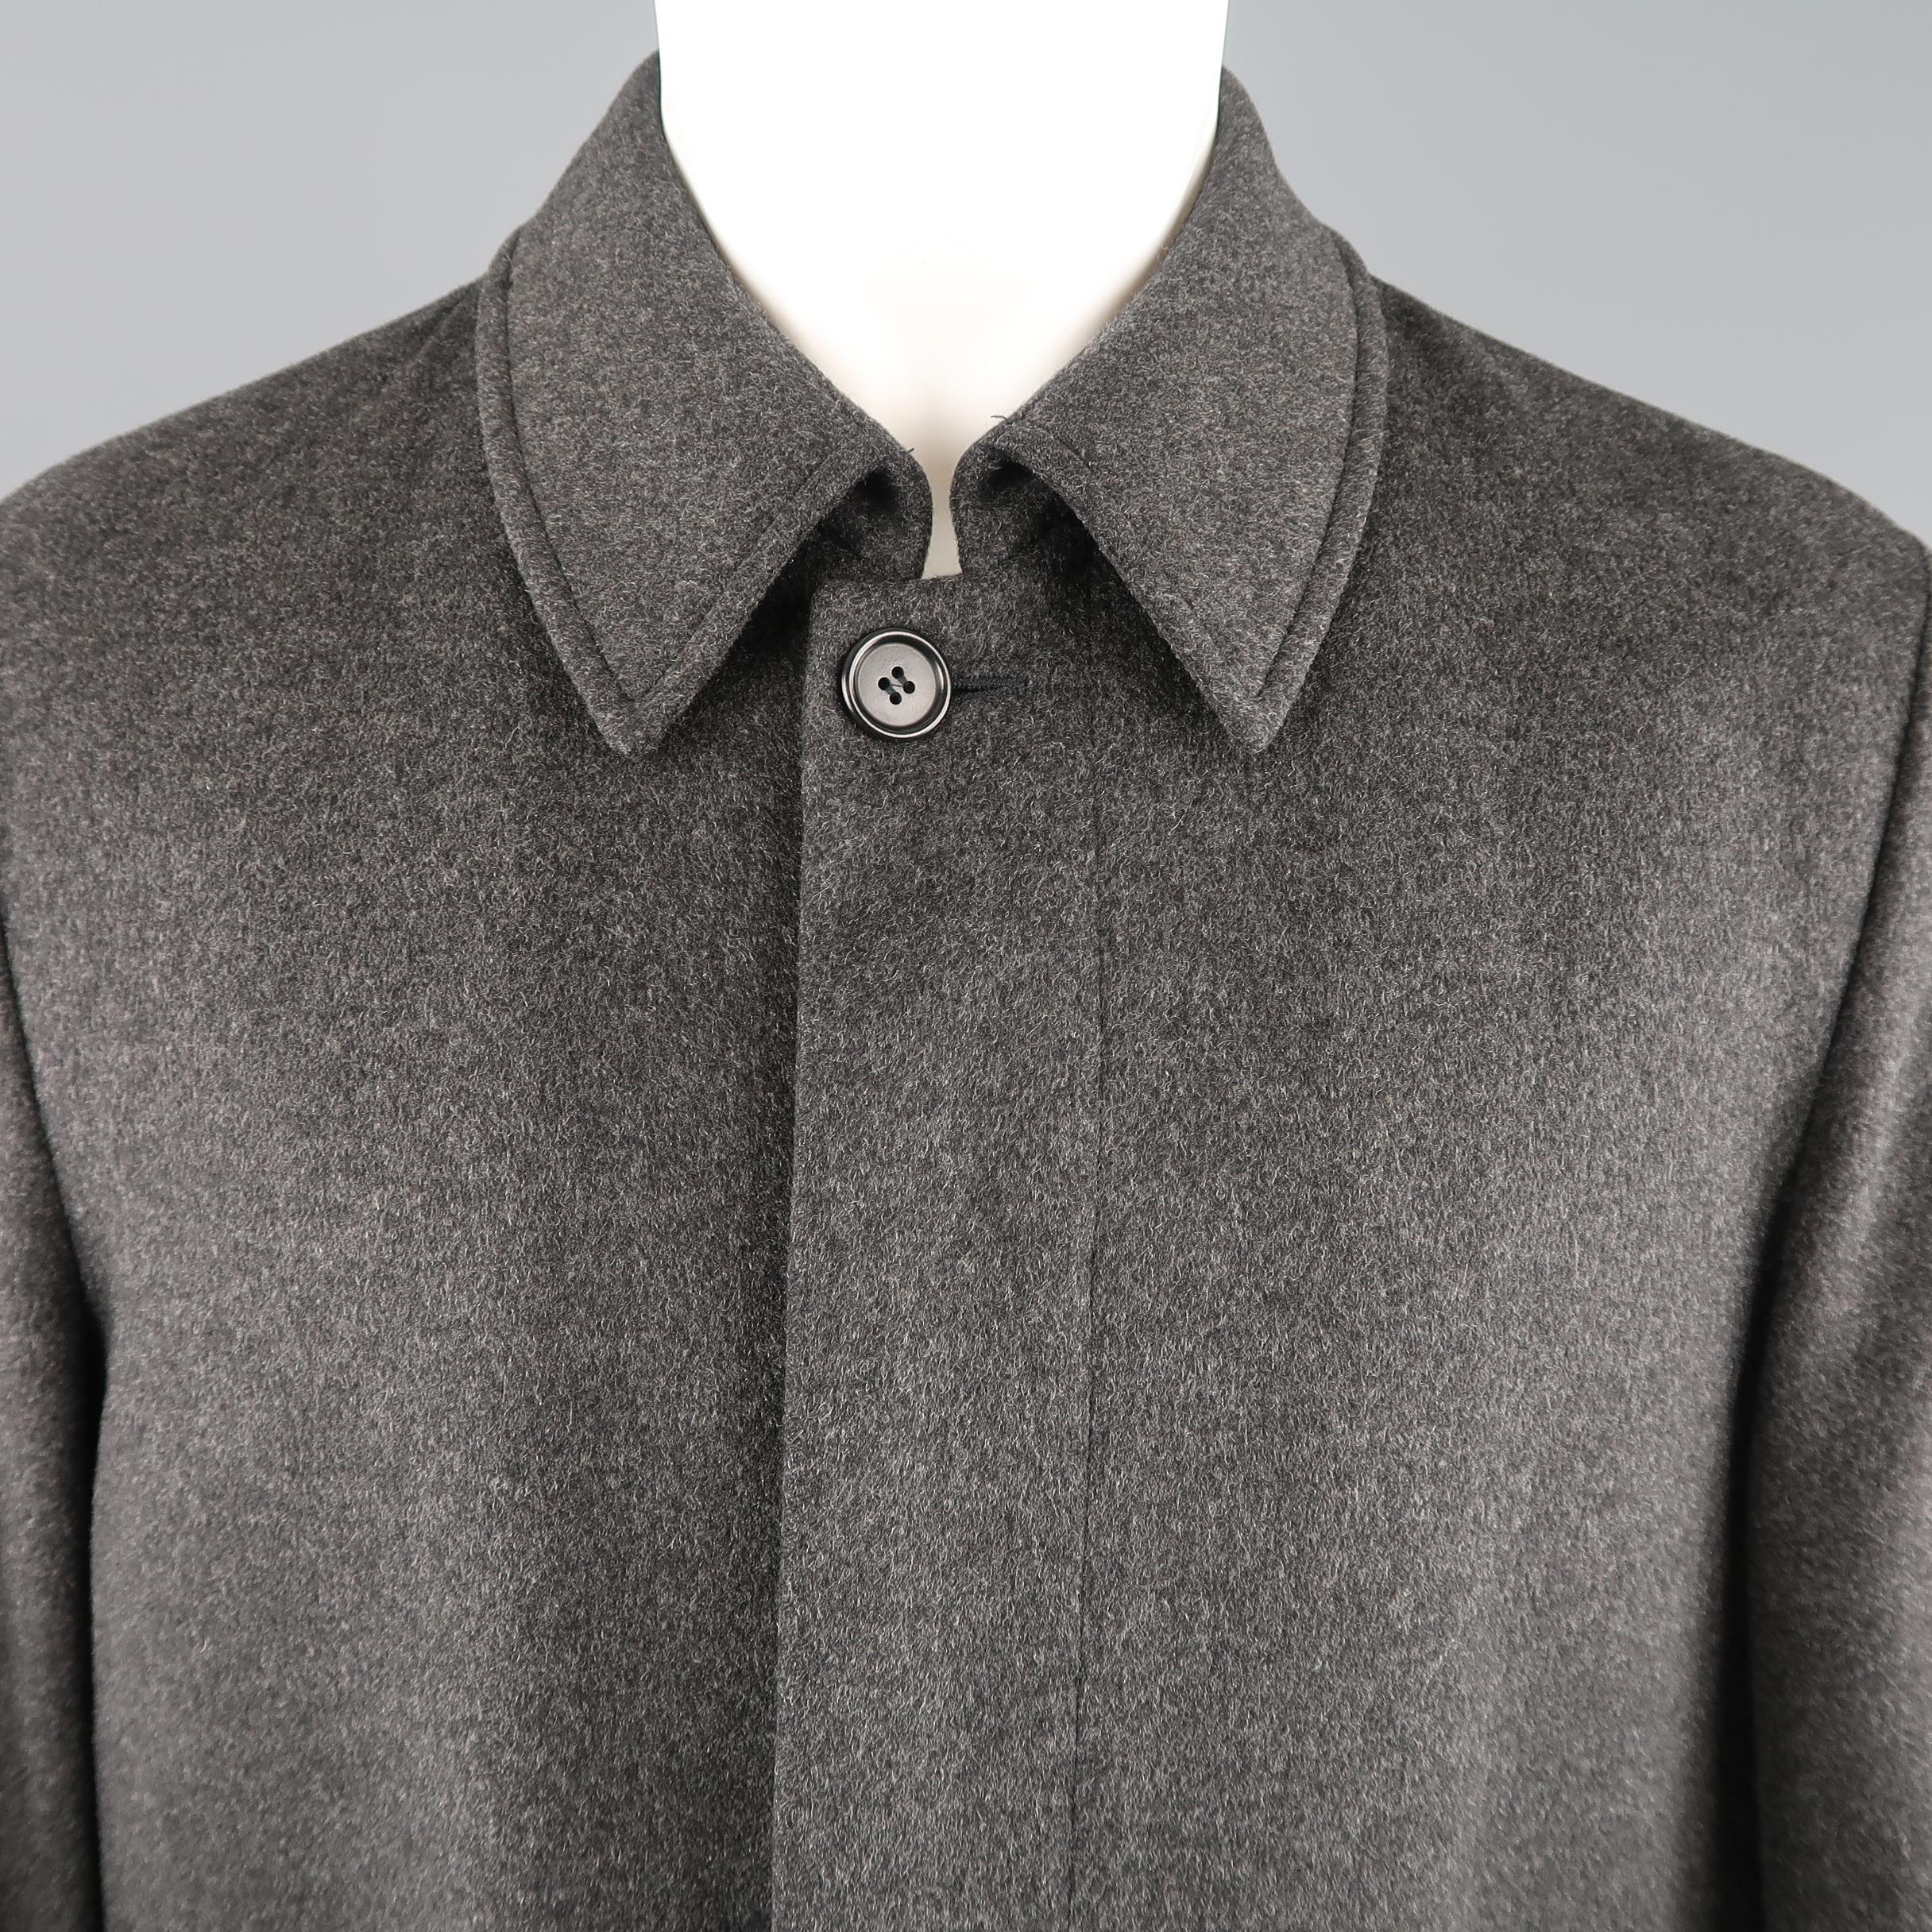 ALLEGRI car coat comes in dark heather gray wool cashmere blend fabric with a pointed collar, hidden placket button up front, slit pockets, and quilted liner. Made in Italy.
 
Excellent Pre-Owned Condition.
Marked: IT 48
 
Measurements:
 
Shoulder: